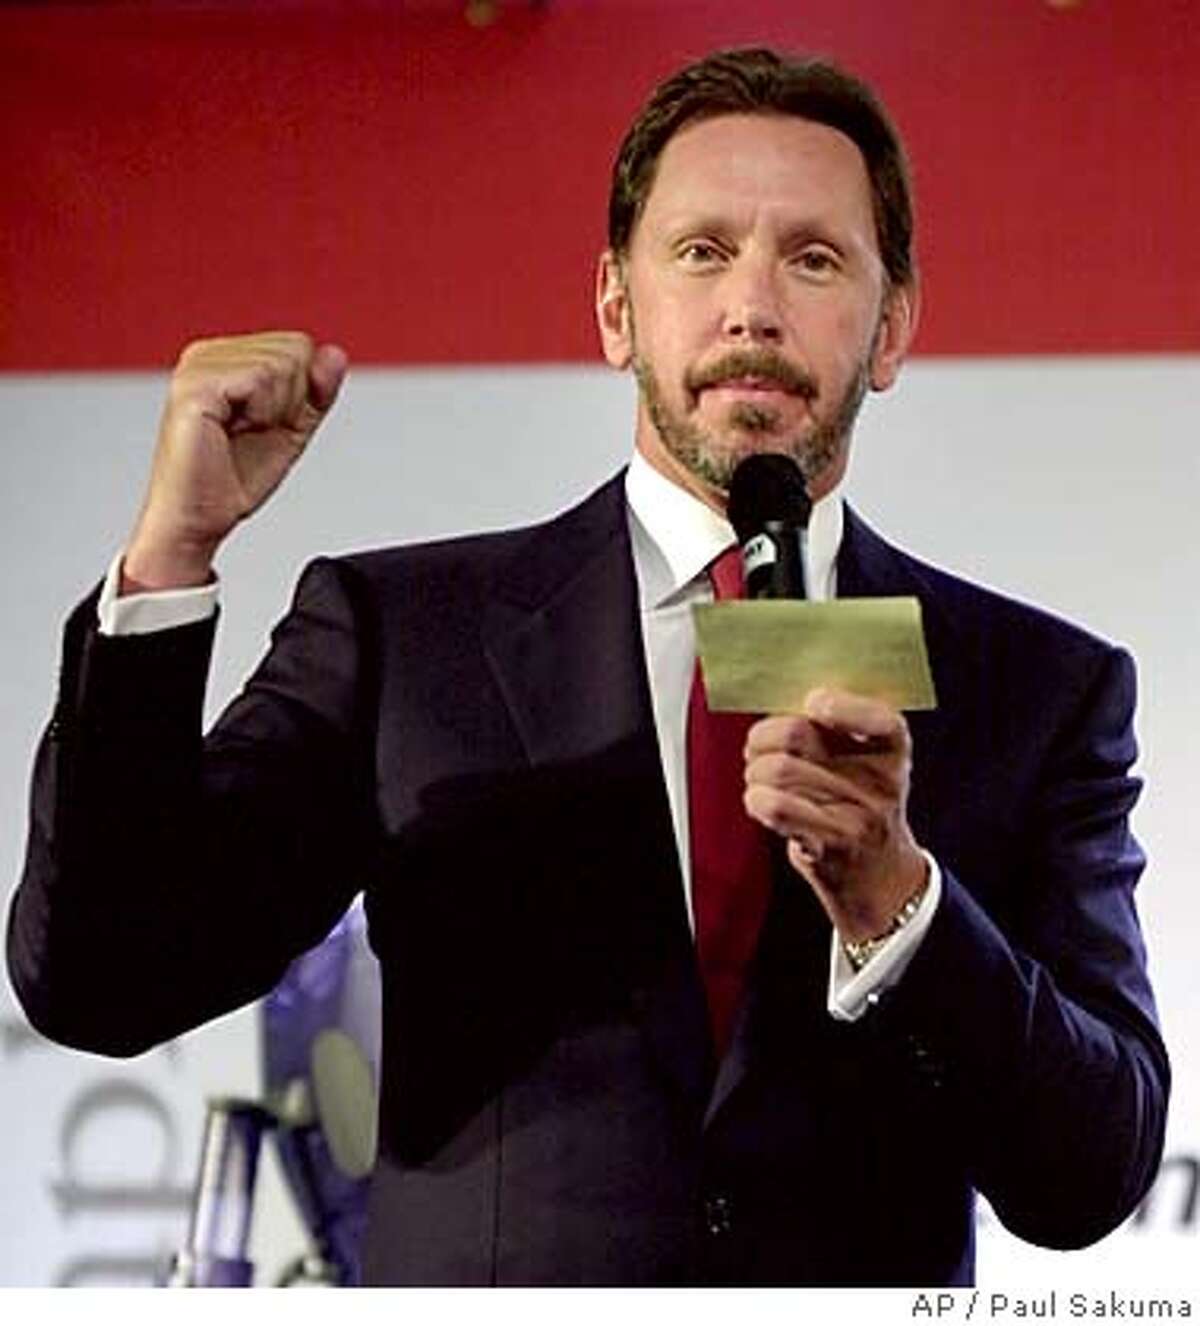 ** FILE ** Oracle Corp. CEO Larry Ellison clenches his fist during a news conference at Oracle's headquarters in Redwood City, Calif., June 28, 2000. A federal judge on Thursday, Sept. 9, 2004, rejected the government's bid to block Oracle Corp.'s $7.7 billion takeover bid for rival PeopleSoft Inc. on grounds that a combination between the business software makers would throttle competition in a narrow market niche. (AP Photo/Paul Sakuma, file) JUNE 28, 2000, PHOTO